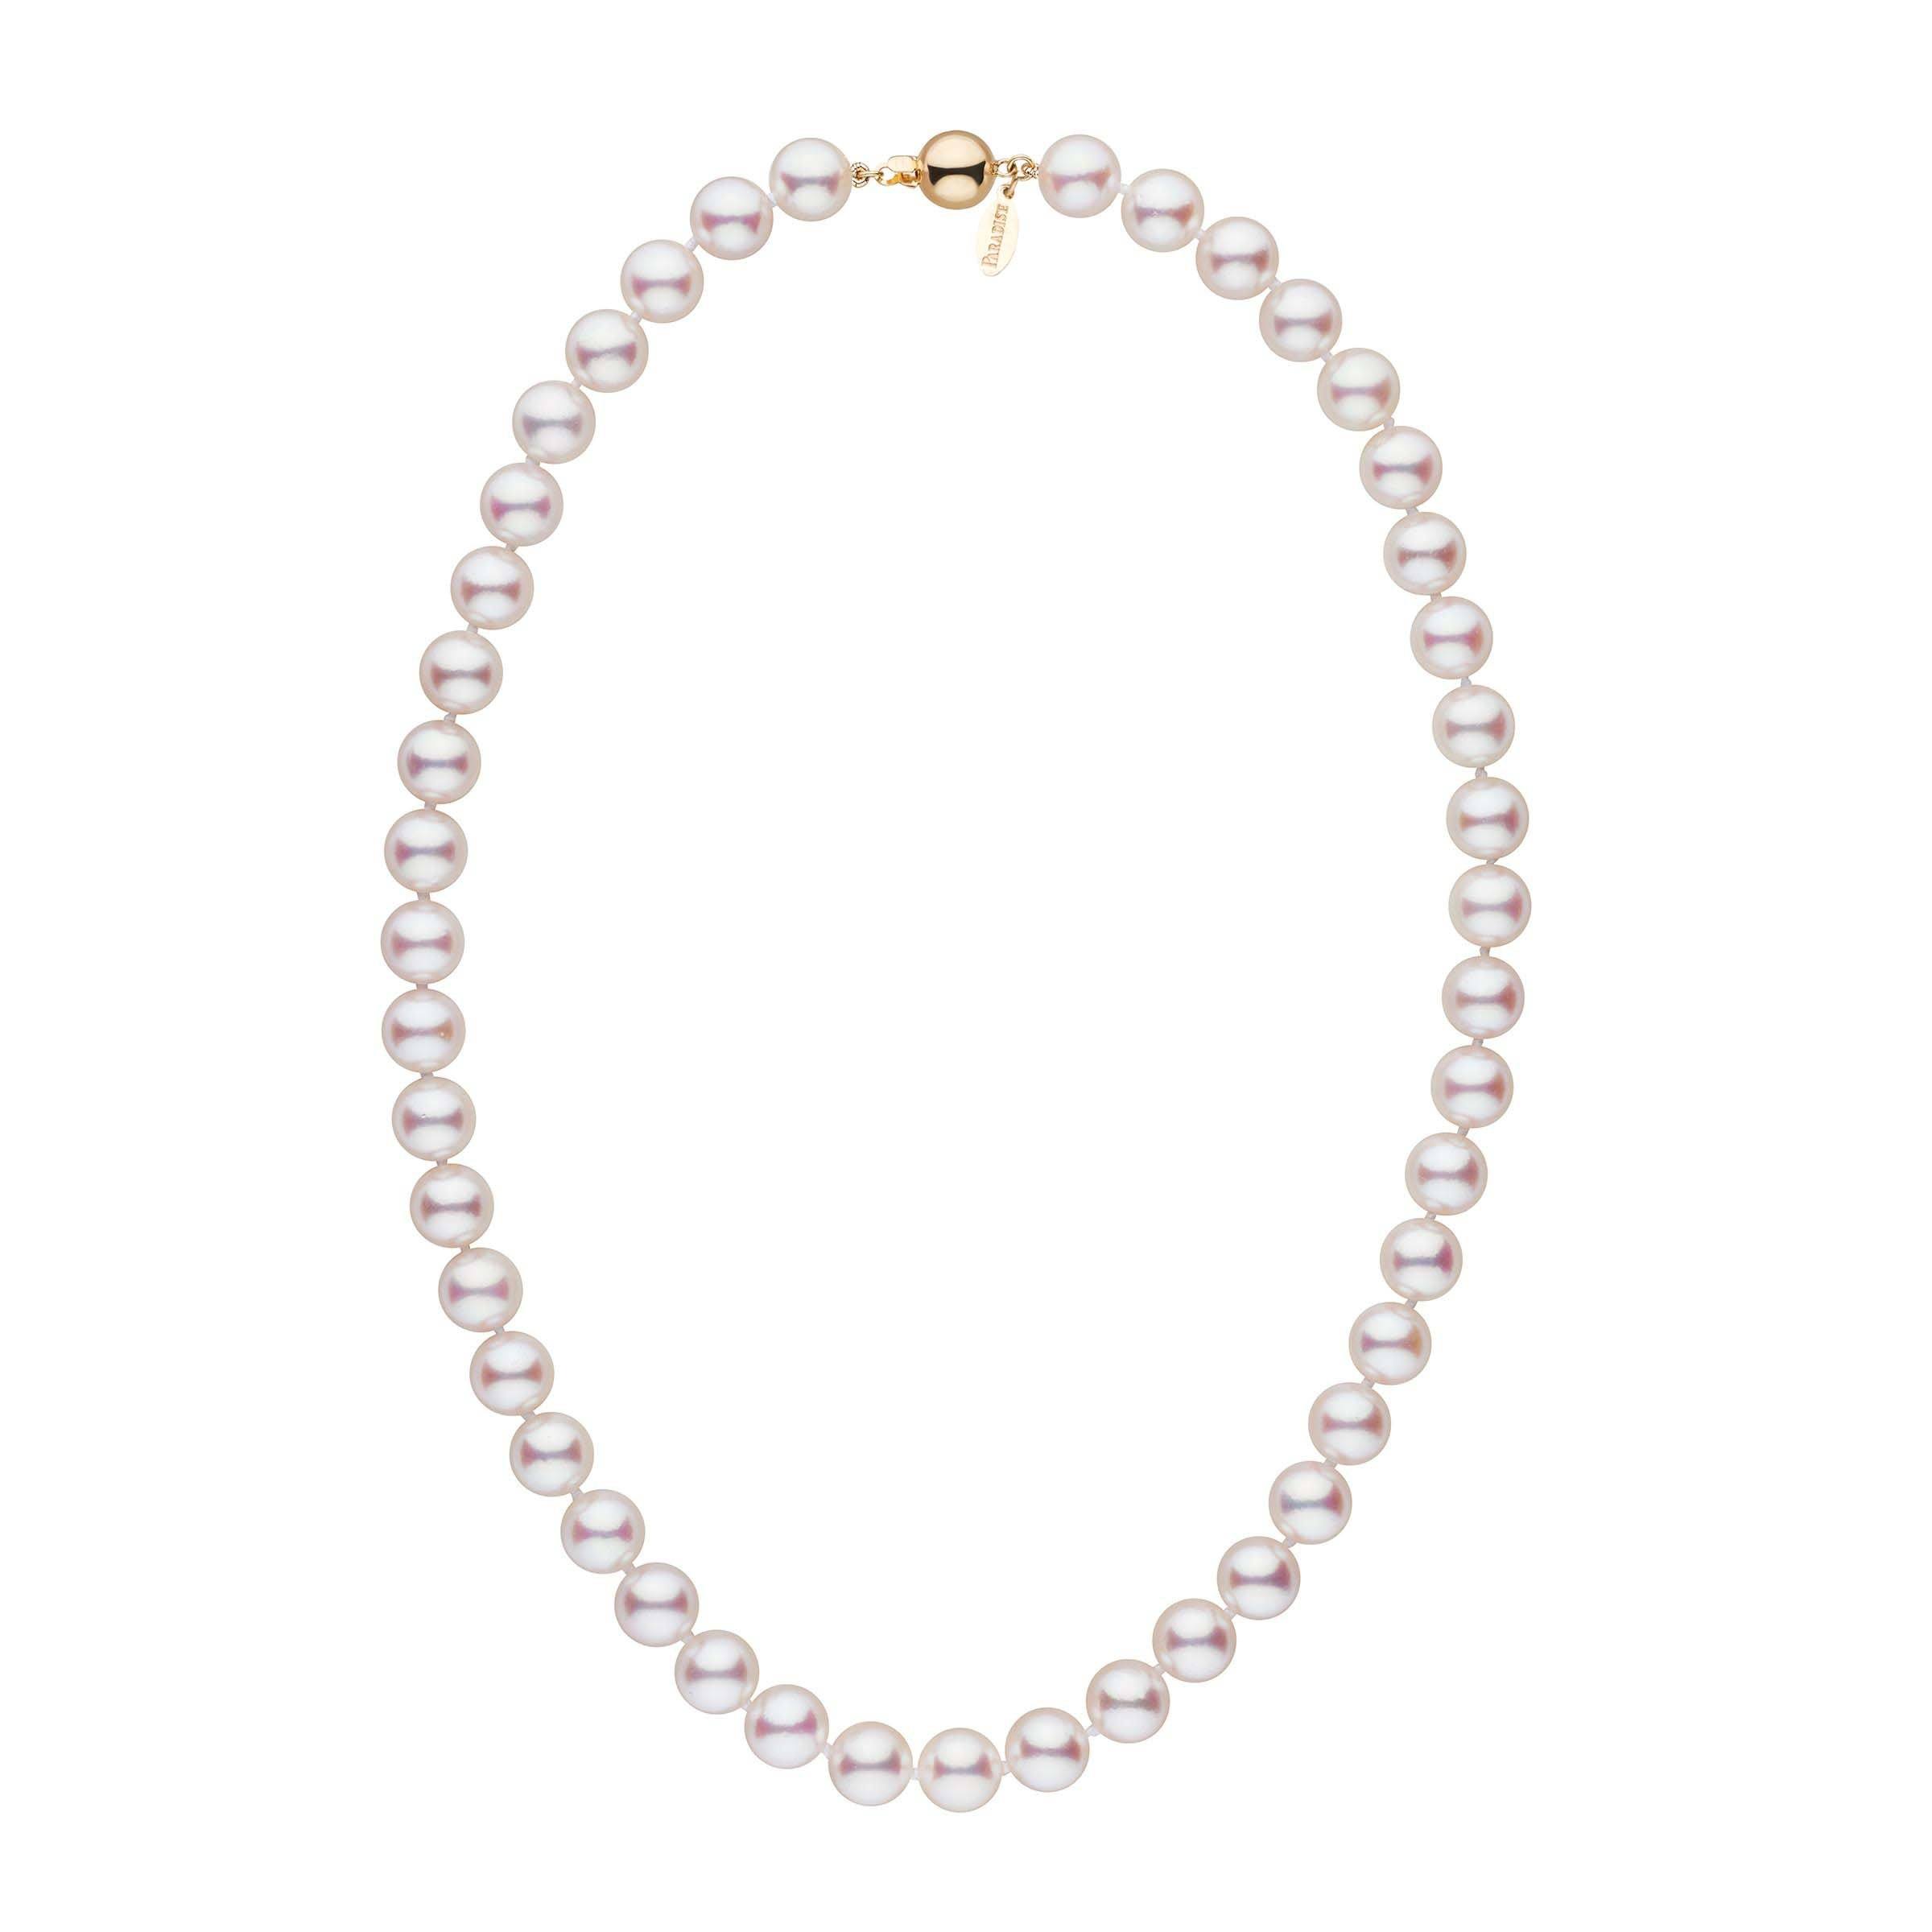 Large, Certified 9.0-9.5 mm 18 Inch White Hanadama Akoya Pearl Necklace Yellow gold polished